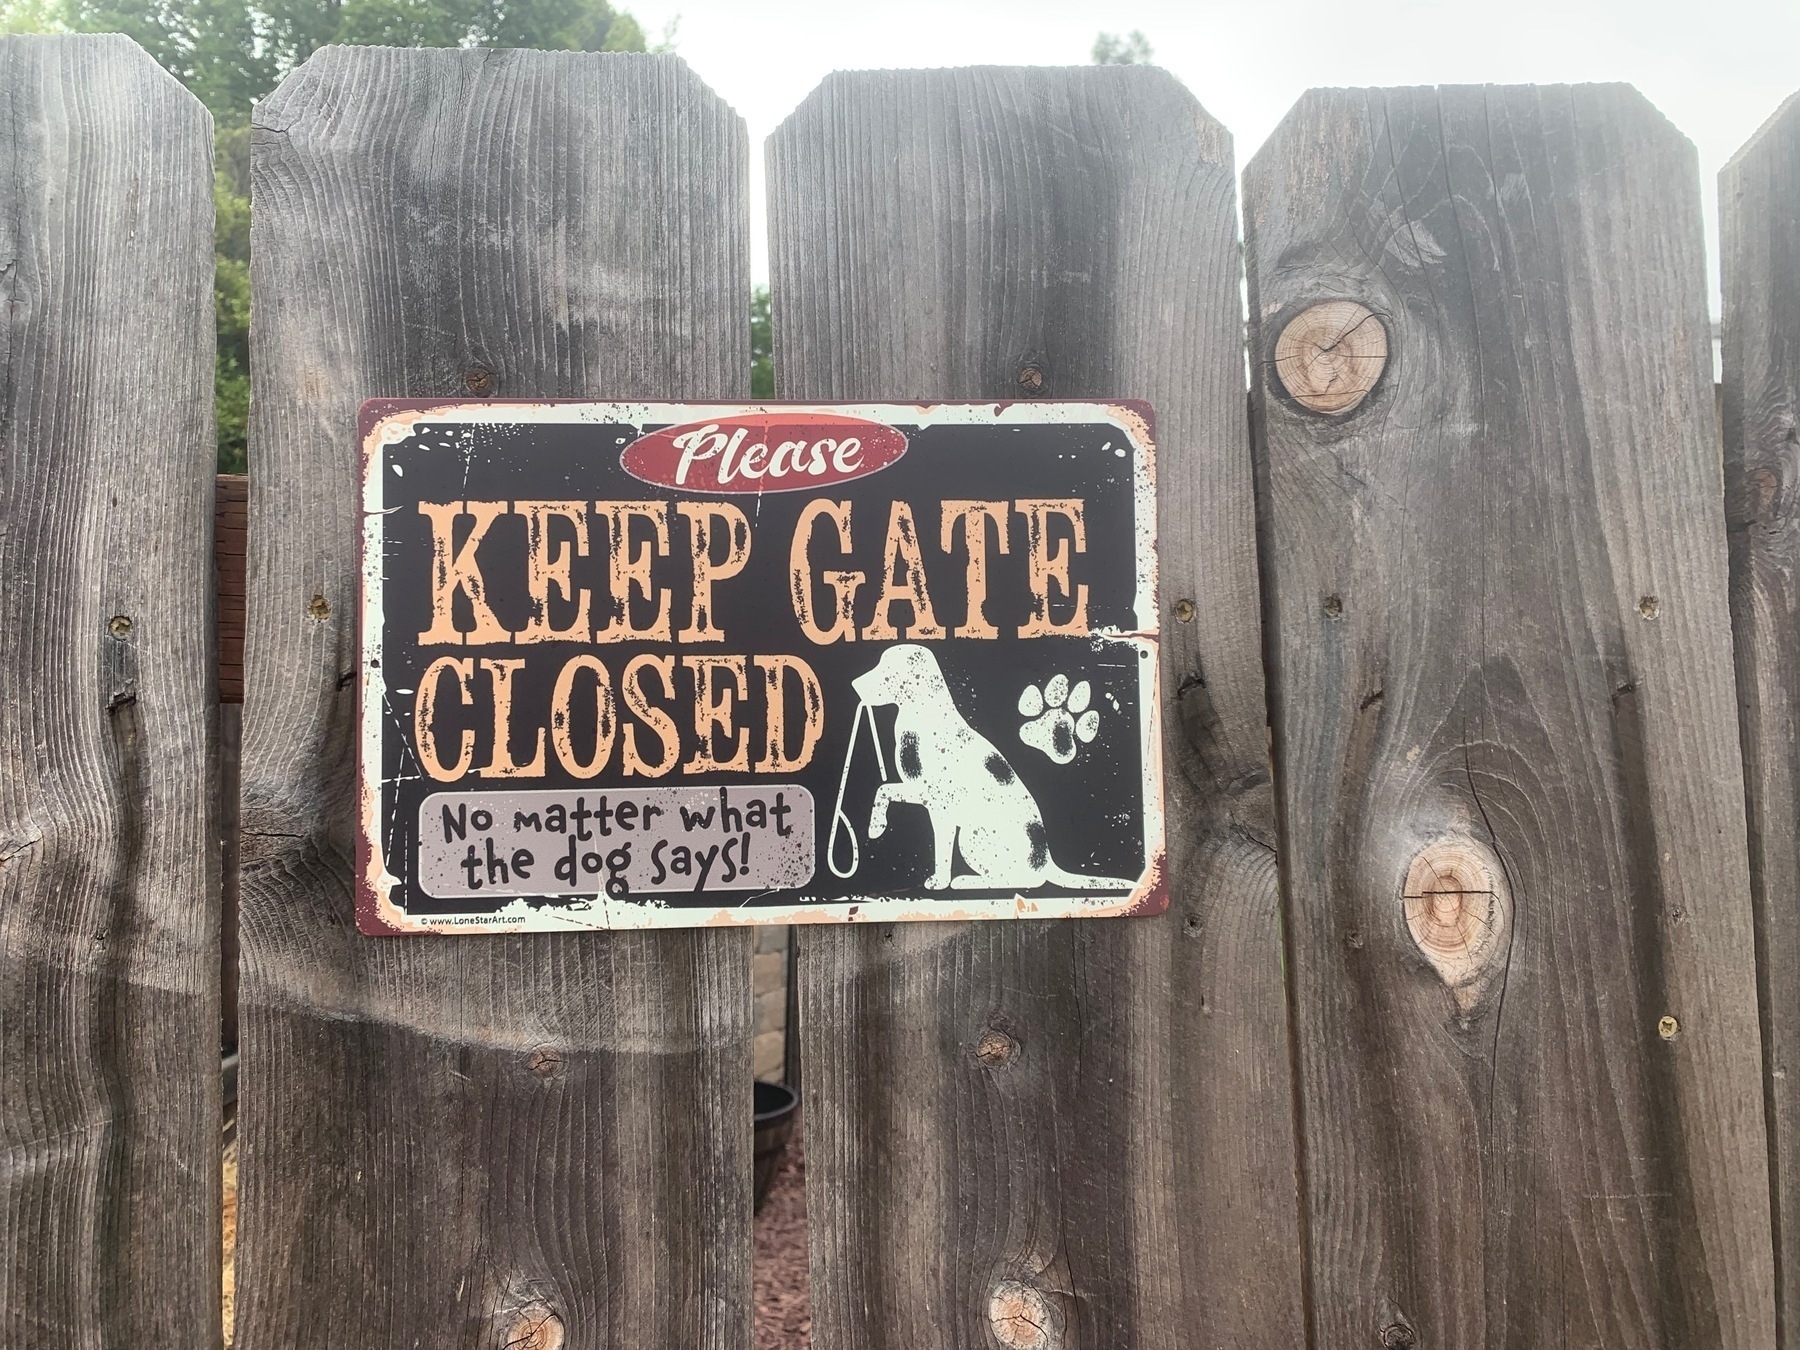 Weathered sign on wooden gate. Text: “KEEP GATE CLOSED: No matter what the dog says!”